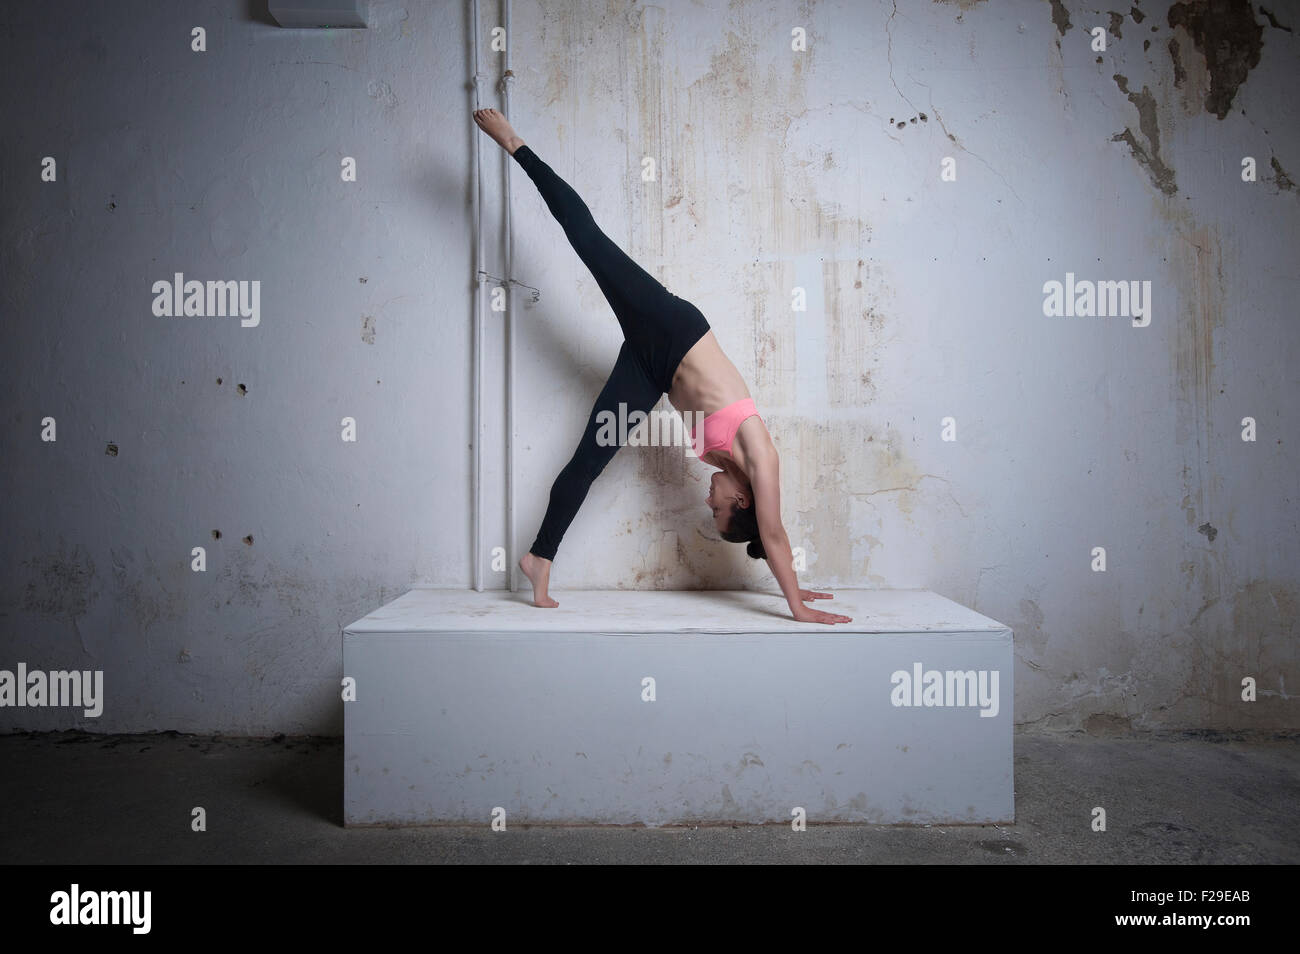 Mid adult woman practicing one legged downward facing dog position on concrete block, Munich, Bavaria, Germany Stock Photo